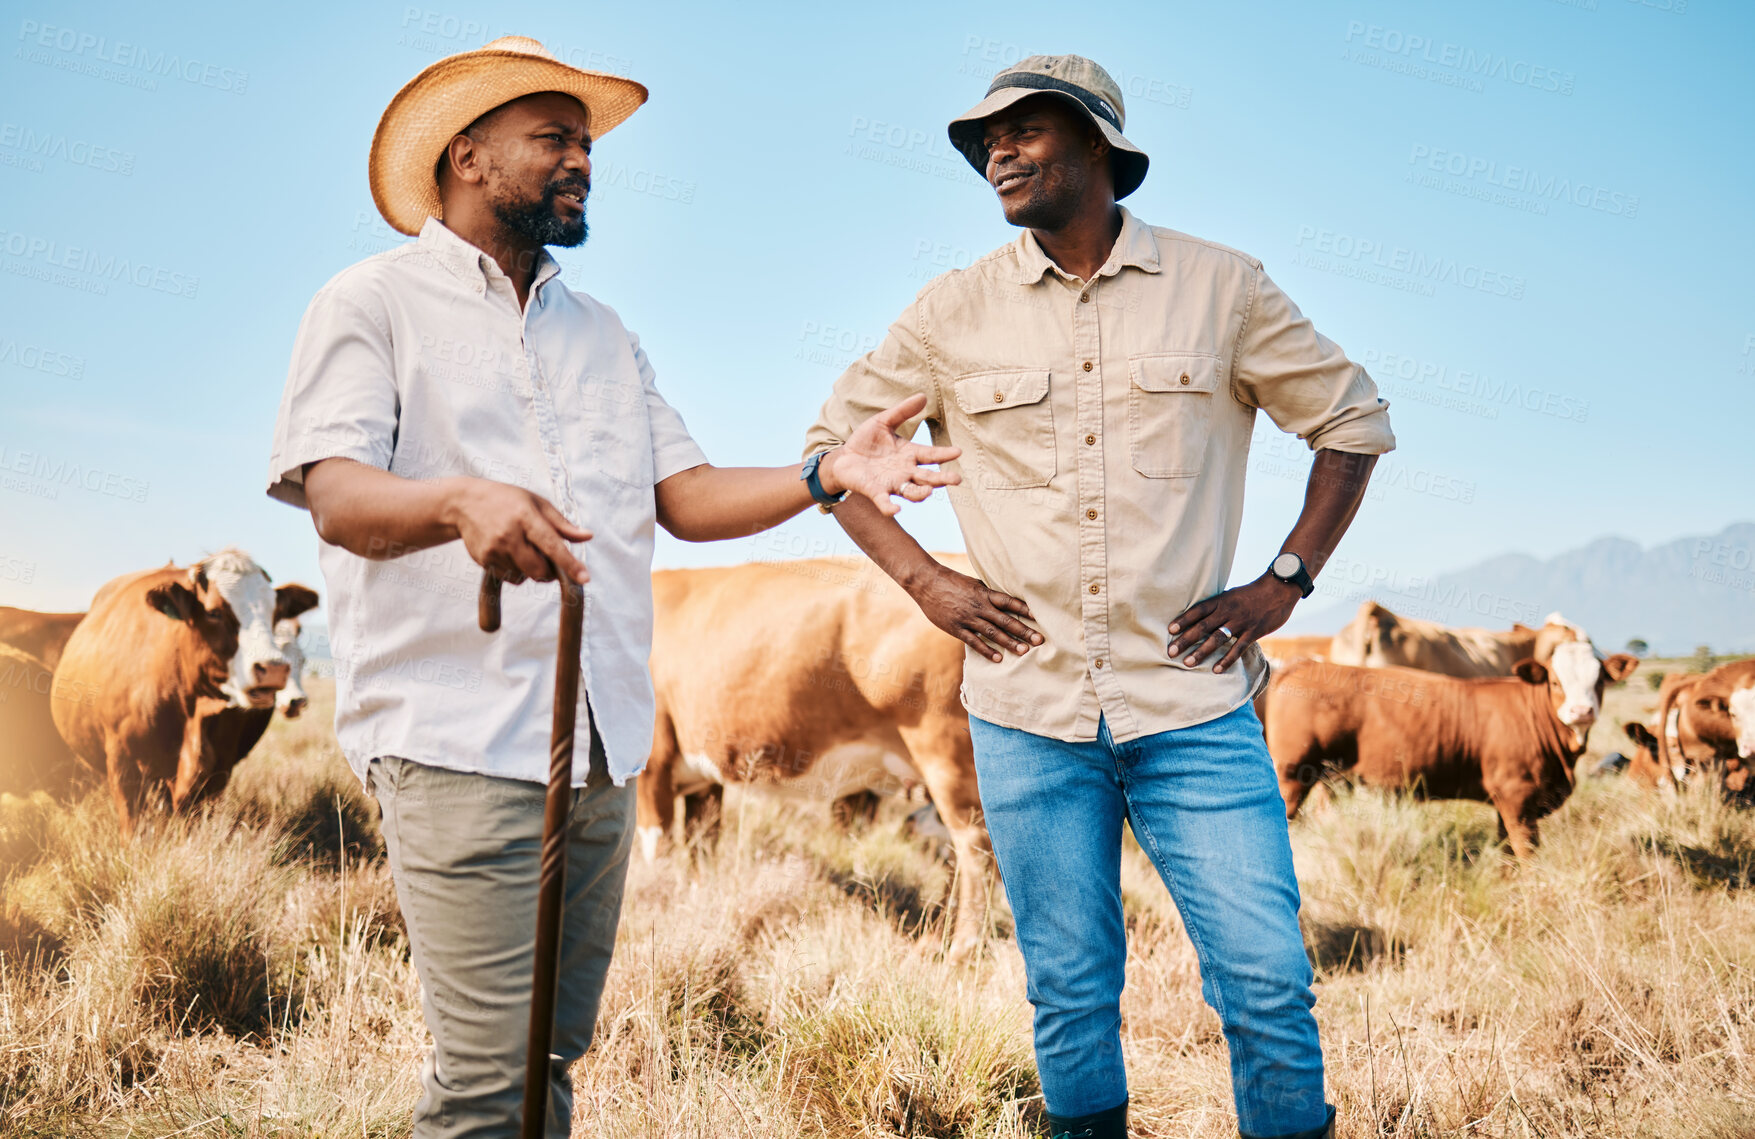 Buy stock photo Cows, teamwork or black people on farm talking by agriculture for livestock, sustainability or agro business. Countryside, men speaking or farmers farming a cattle herd or animals on grass field 